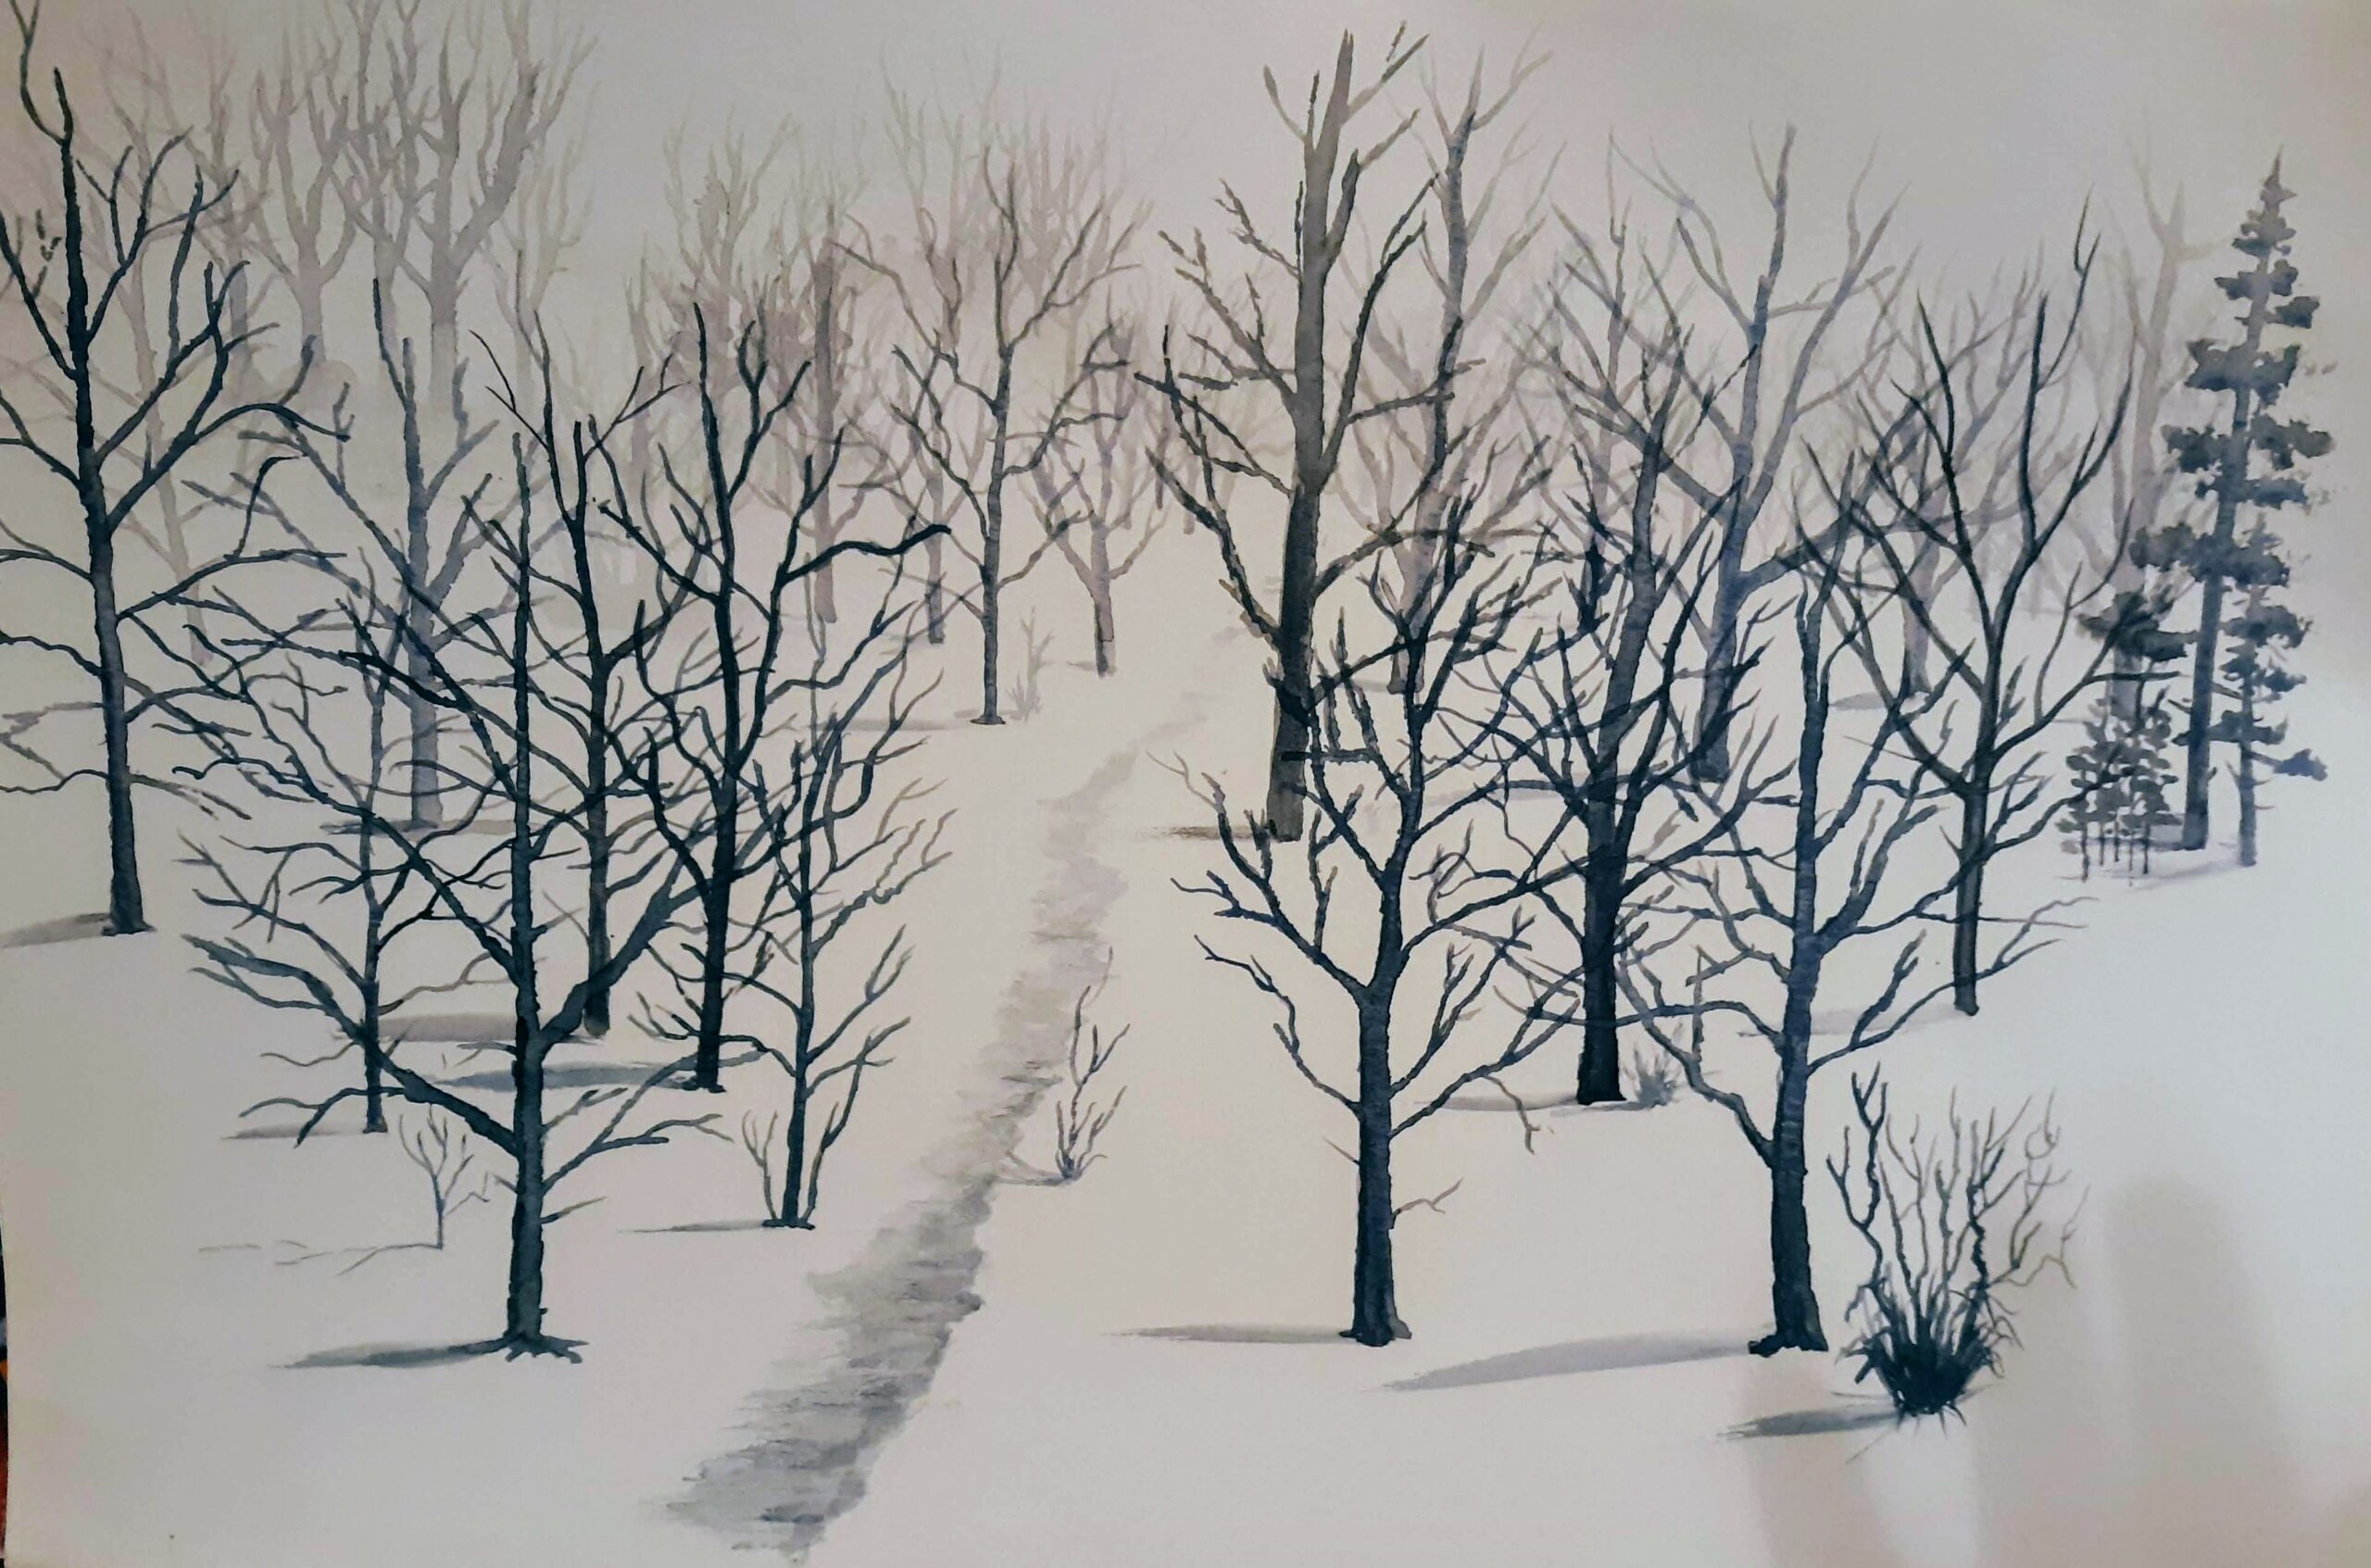 This is an 11 x 17 watercolor of a winter forest